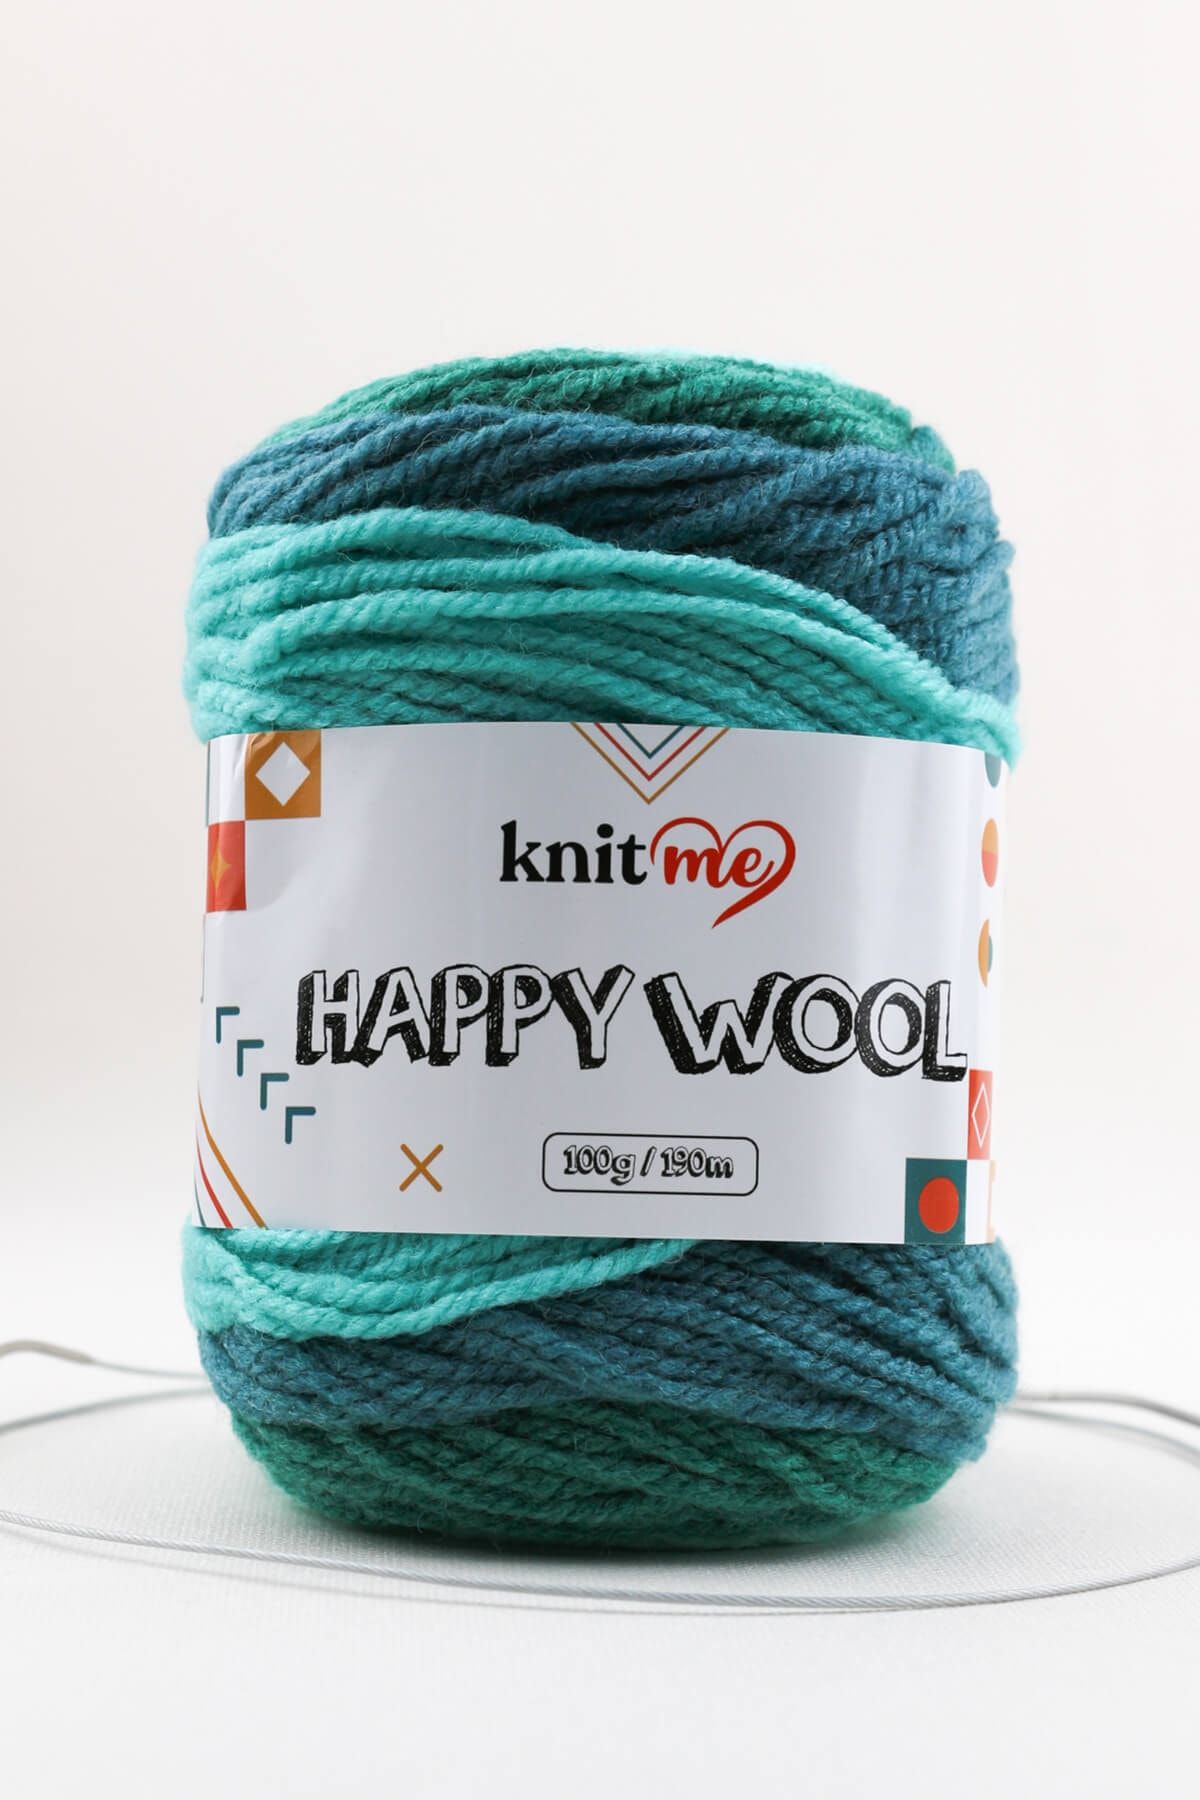 All About Acrylic - Knitting Happiness